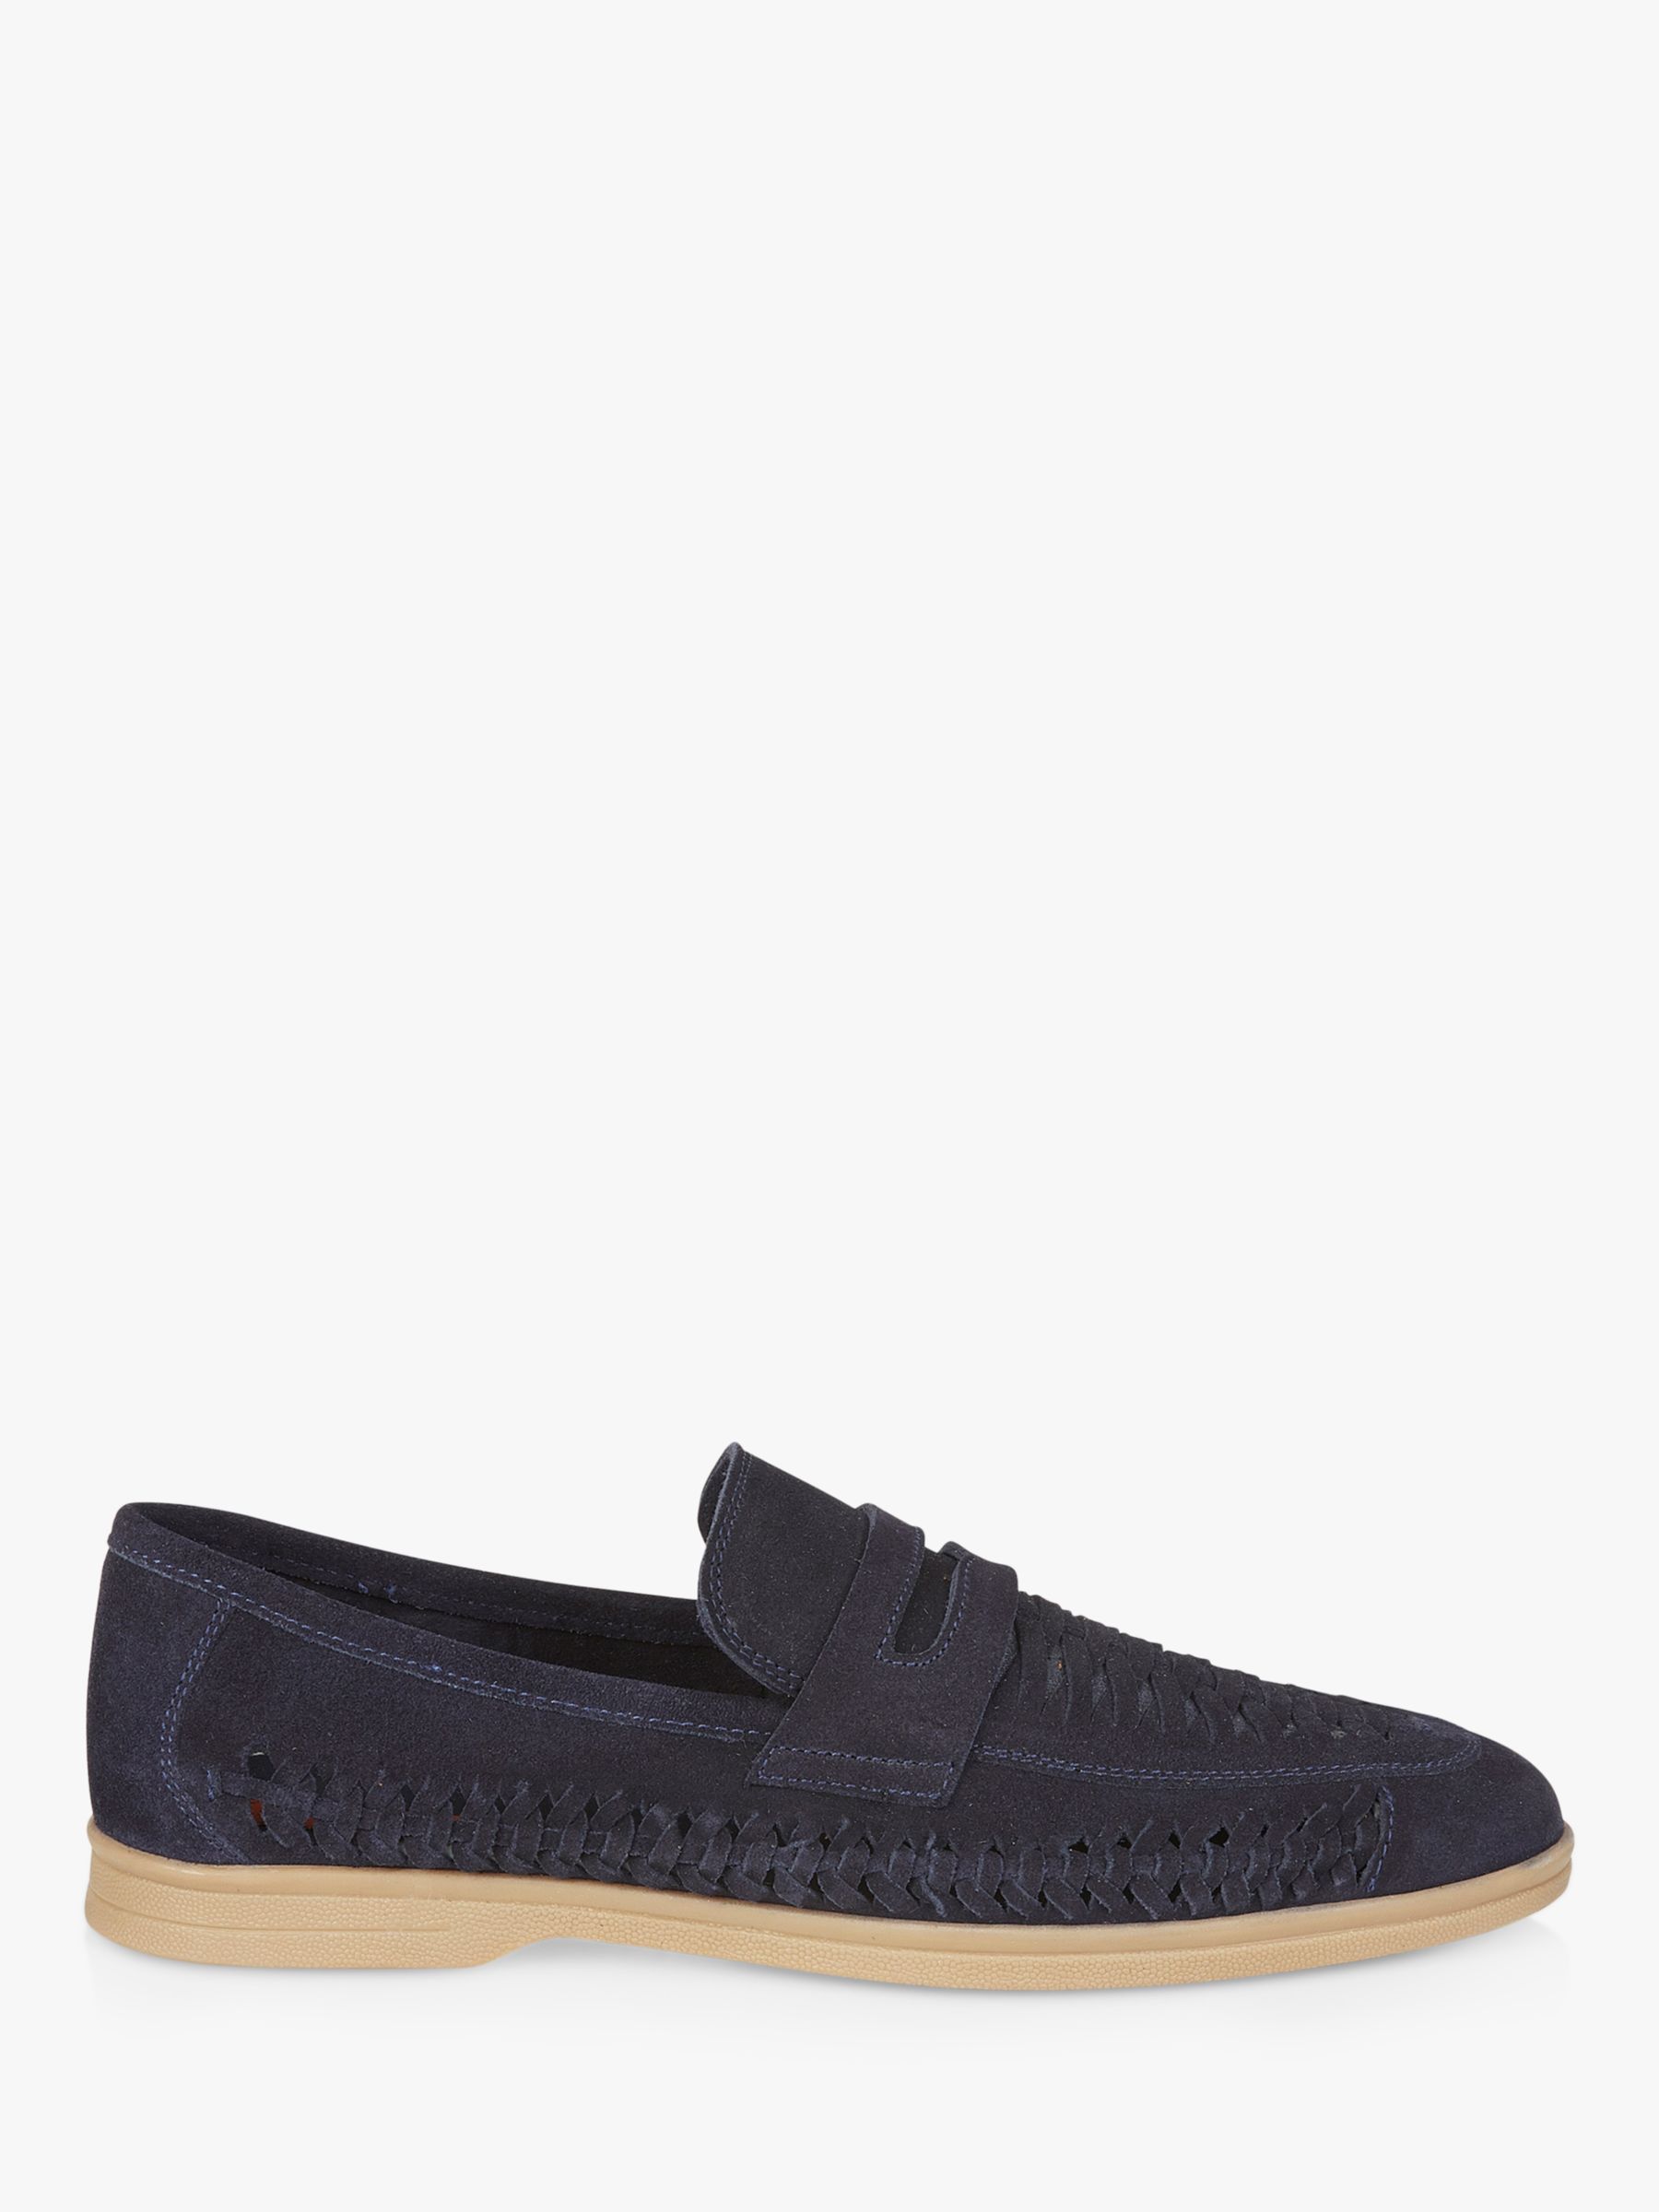 Silver Street London Perth Suede Loafers, Navy at John Lewis & Partners